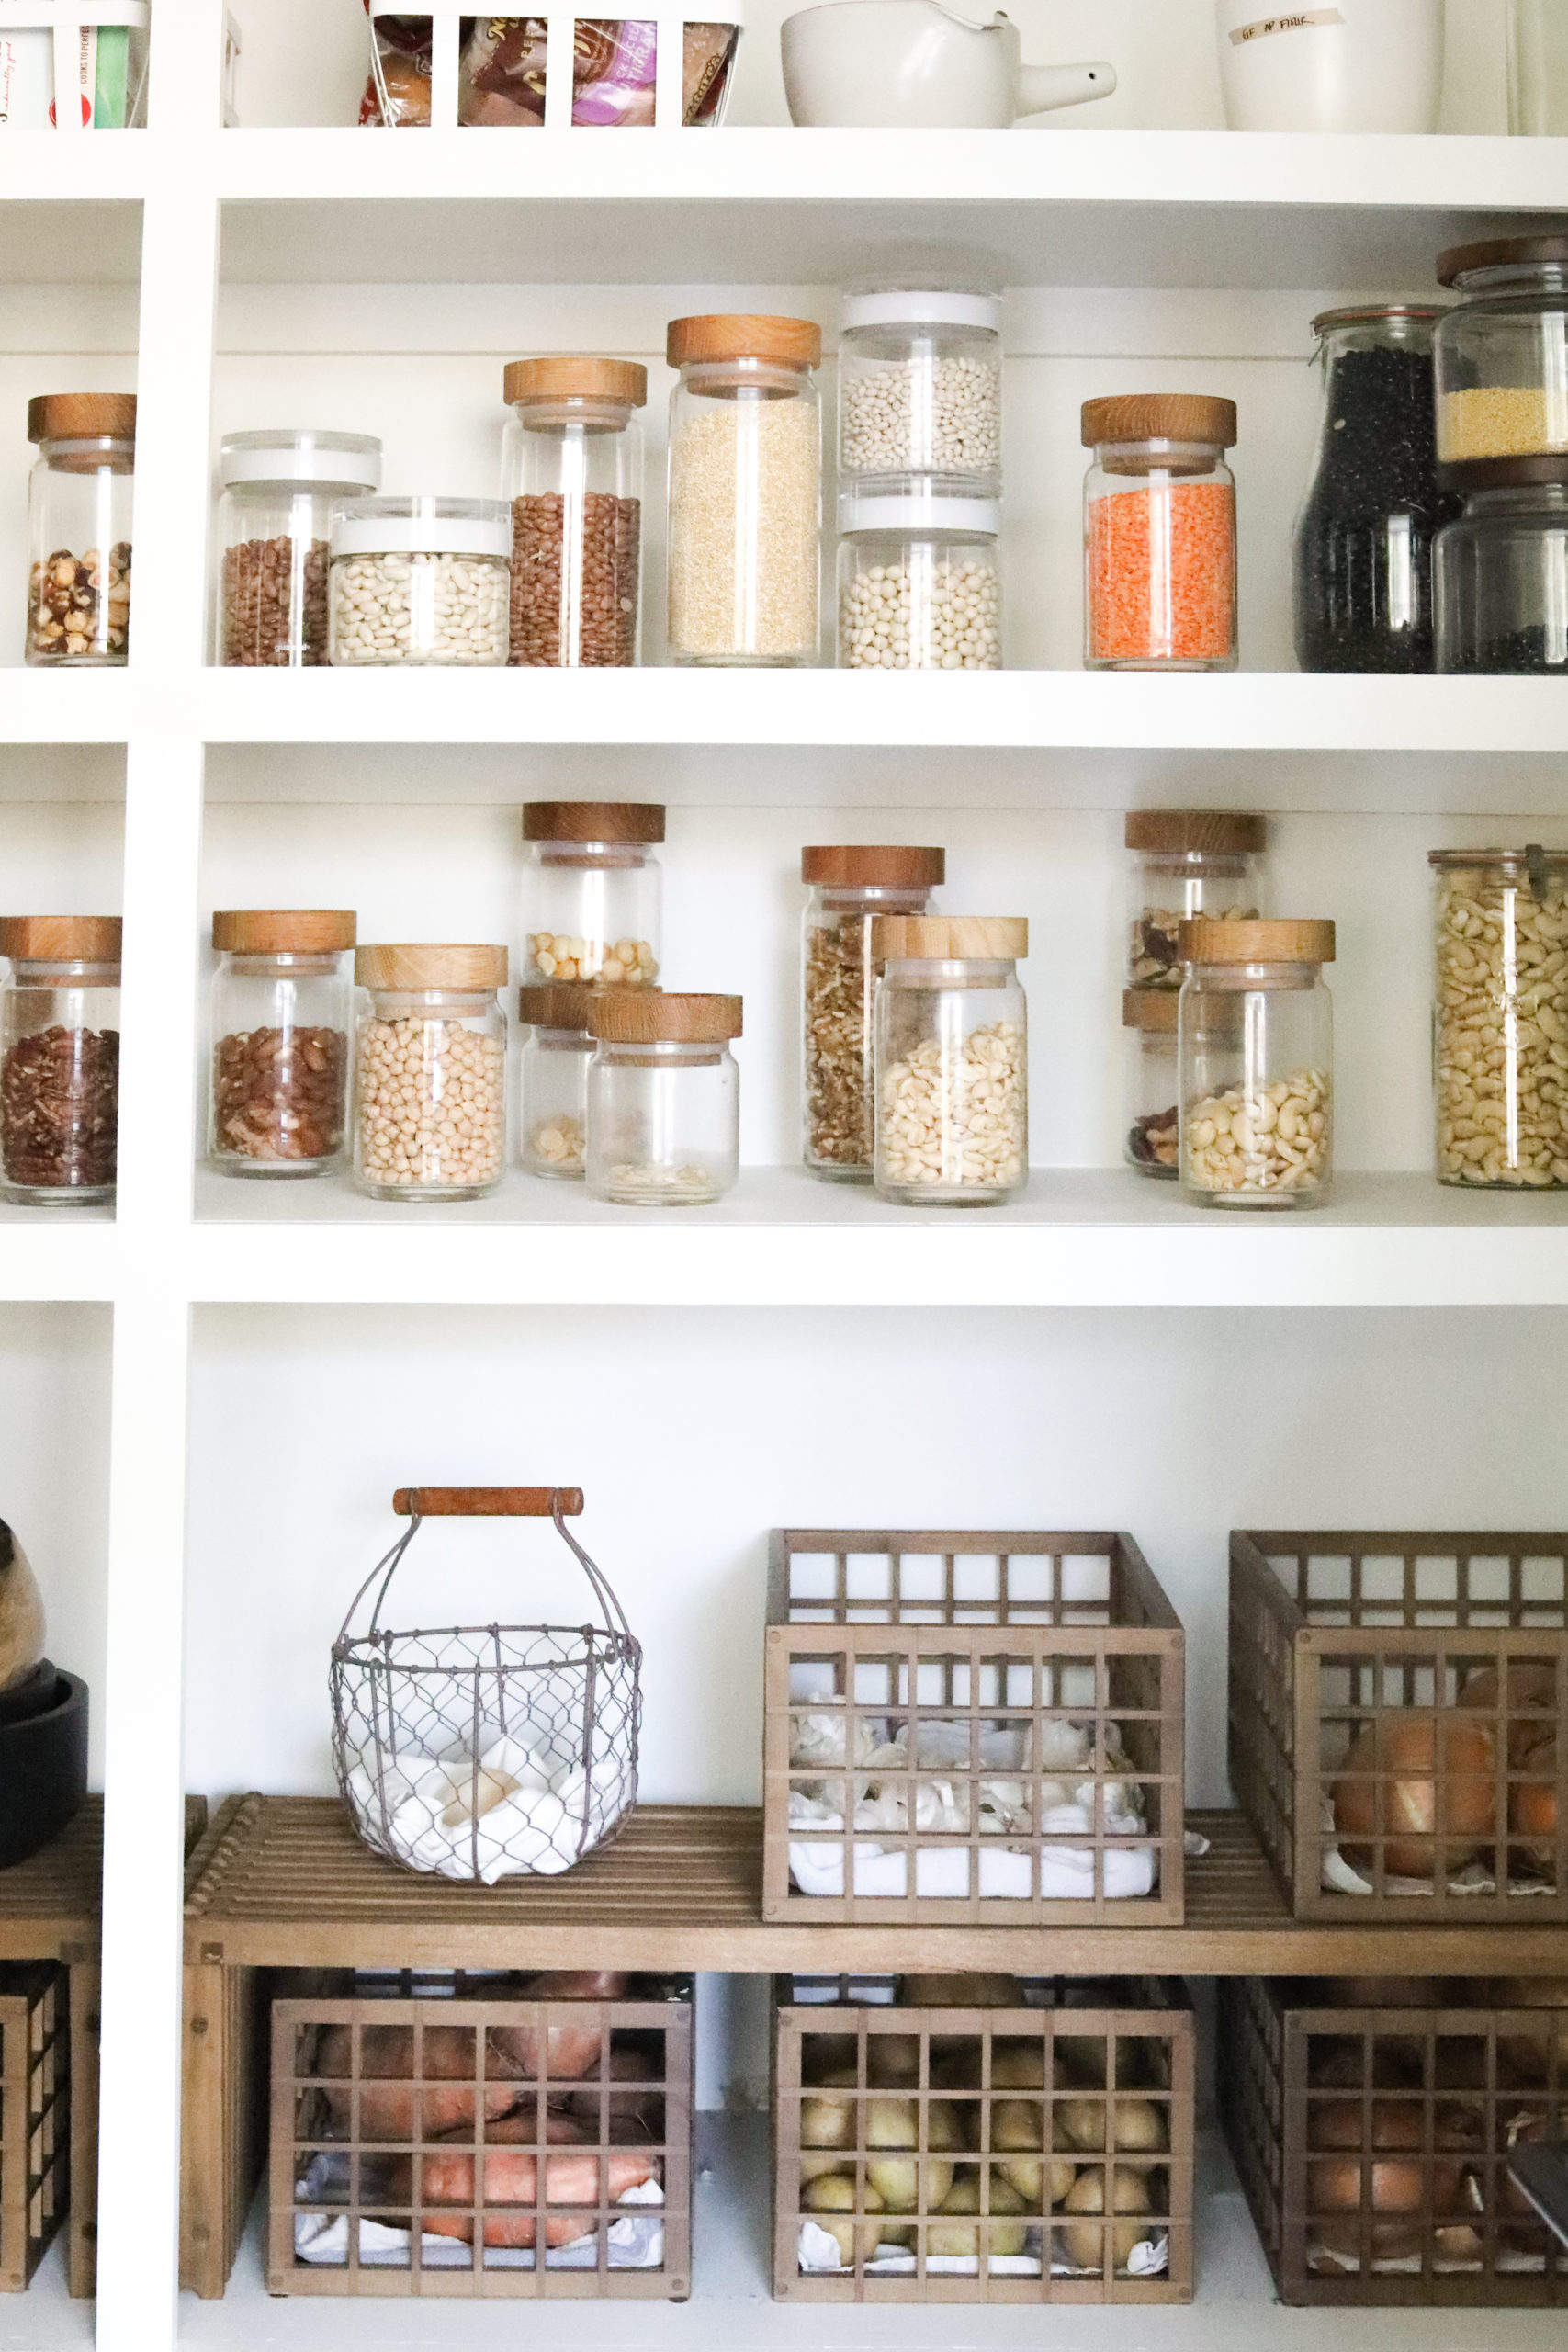 How To Stock Your Pantry For Balanced Eating | Nutrition Stripped